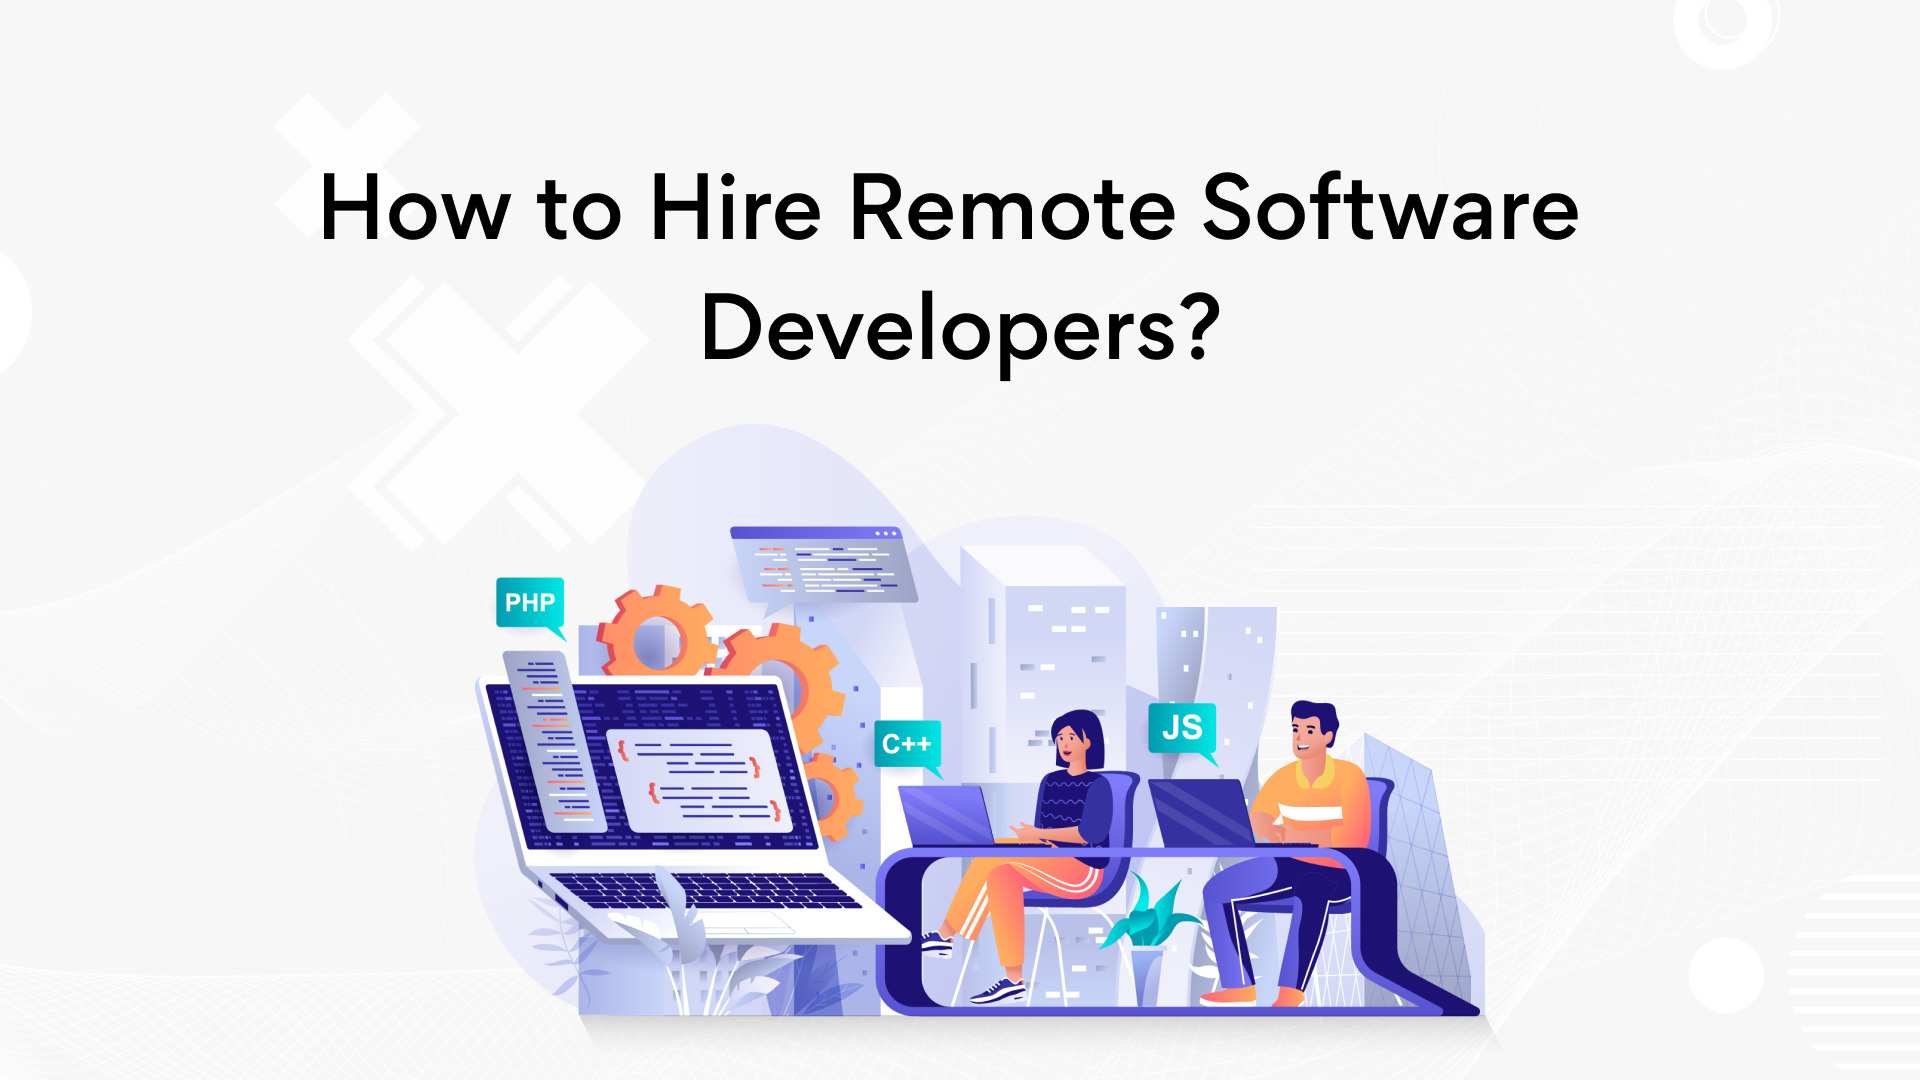 Hiring Remote Software Developers? Follow These 7 Steps